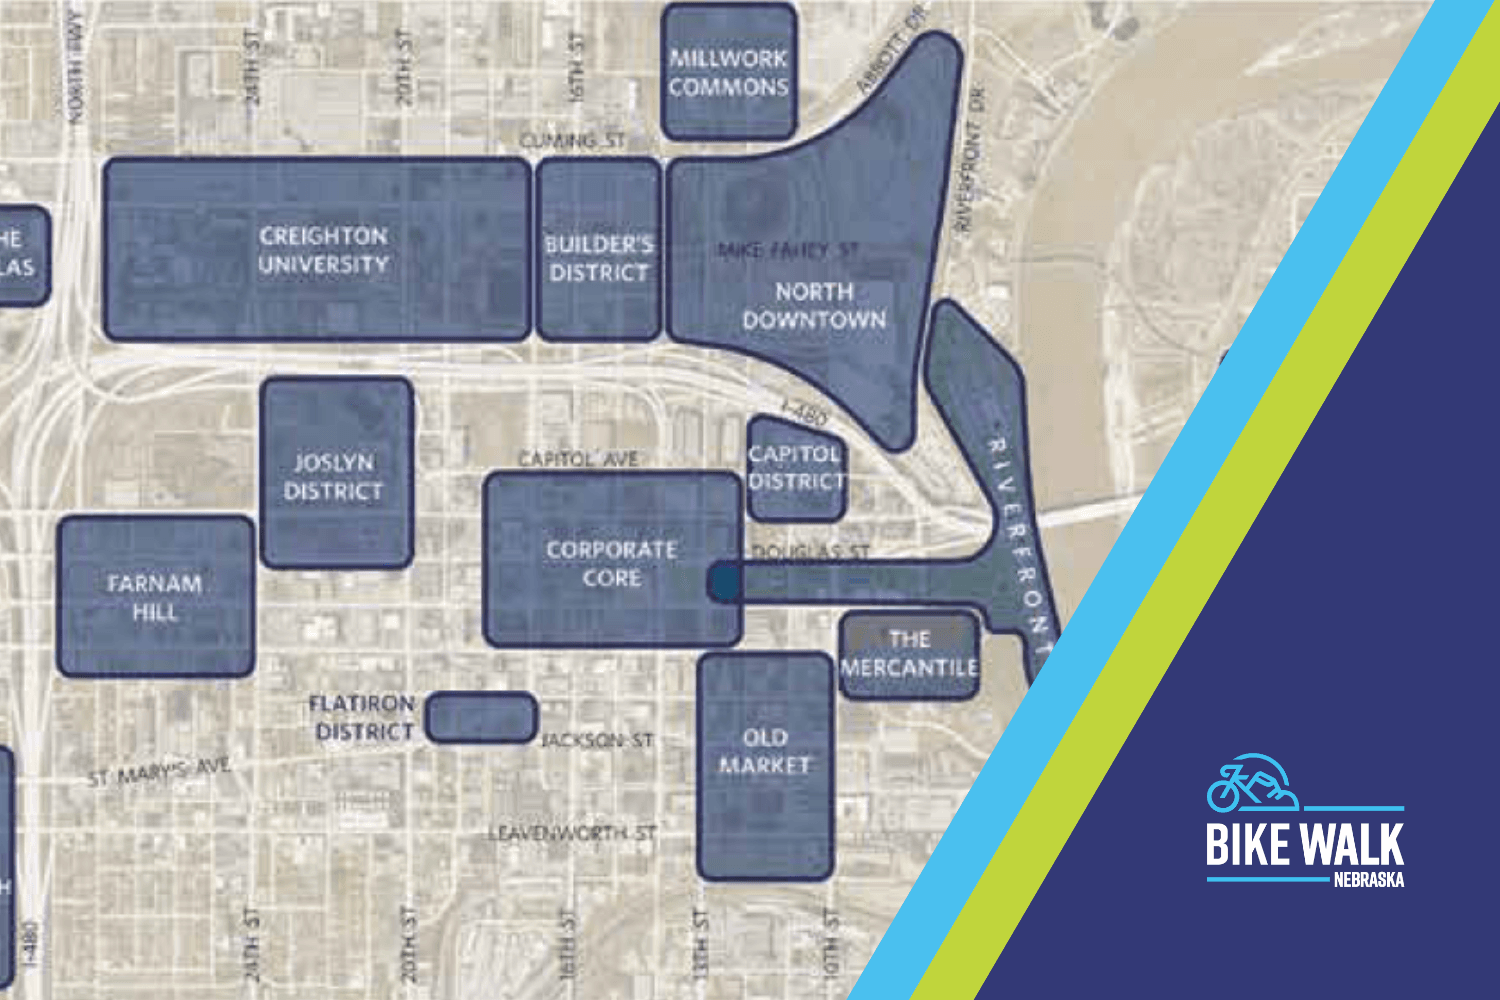 Builder's District: A Connectivity Opportunity for Omaha